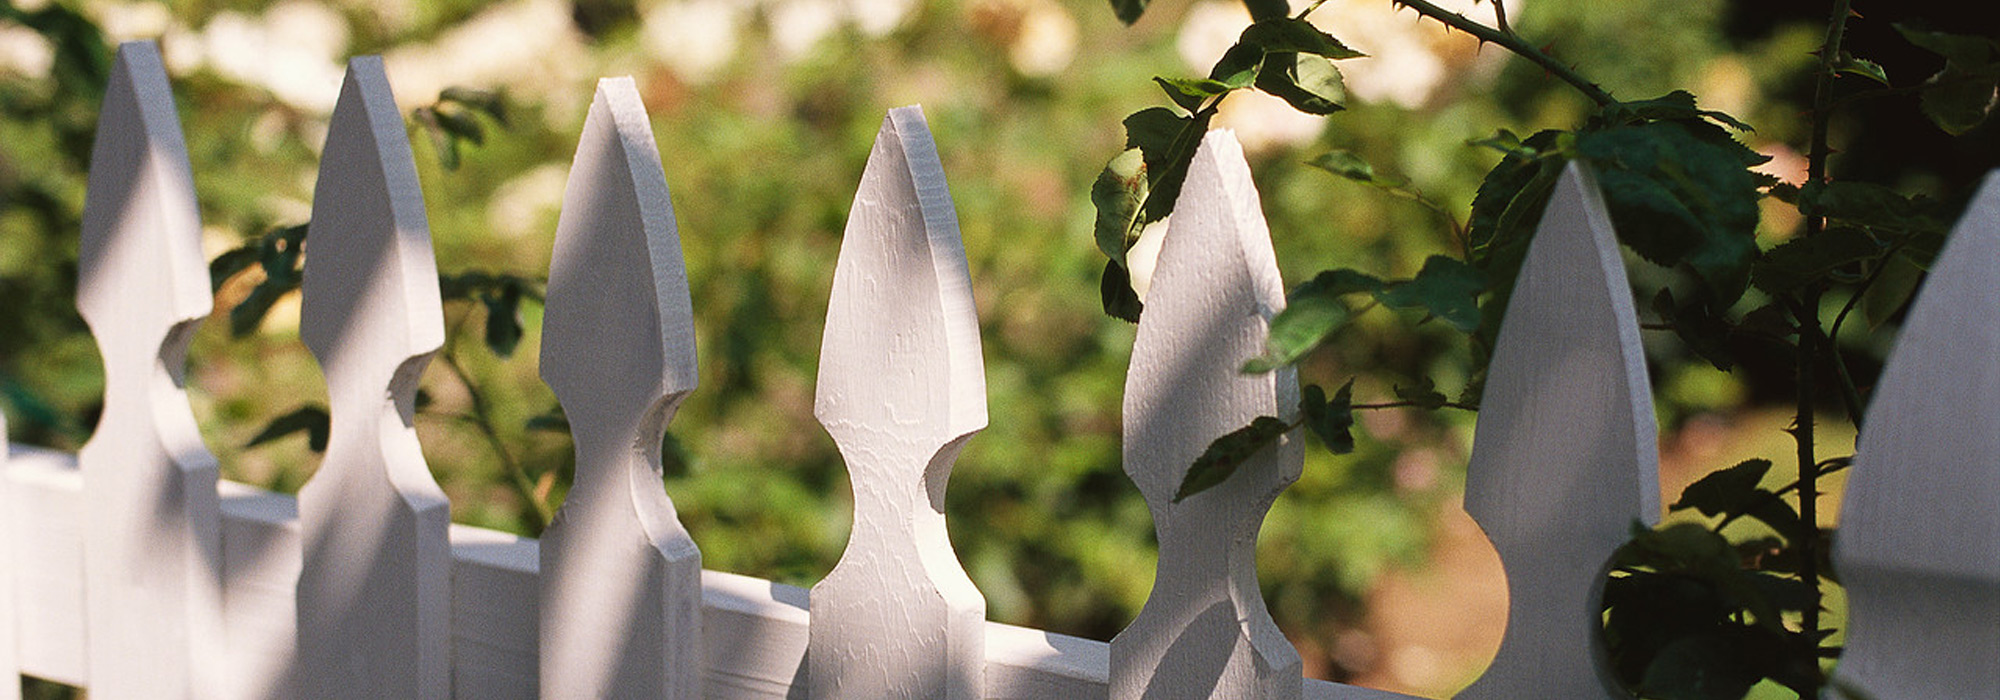 White picket fence near bushes. Privacy and protection concept.